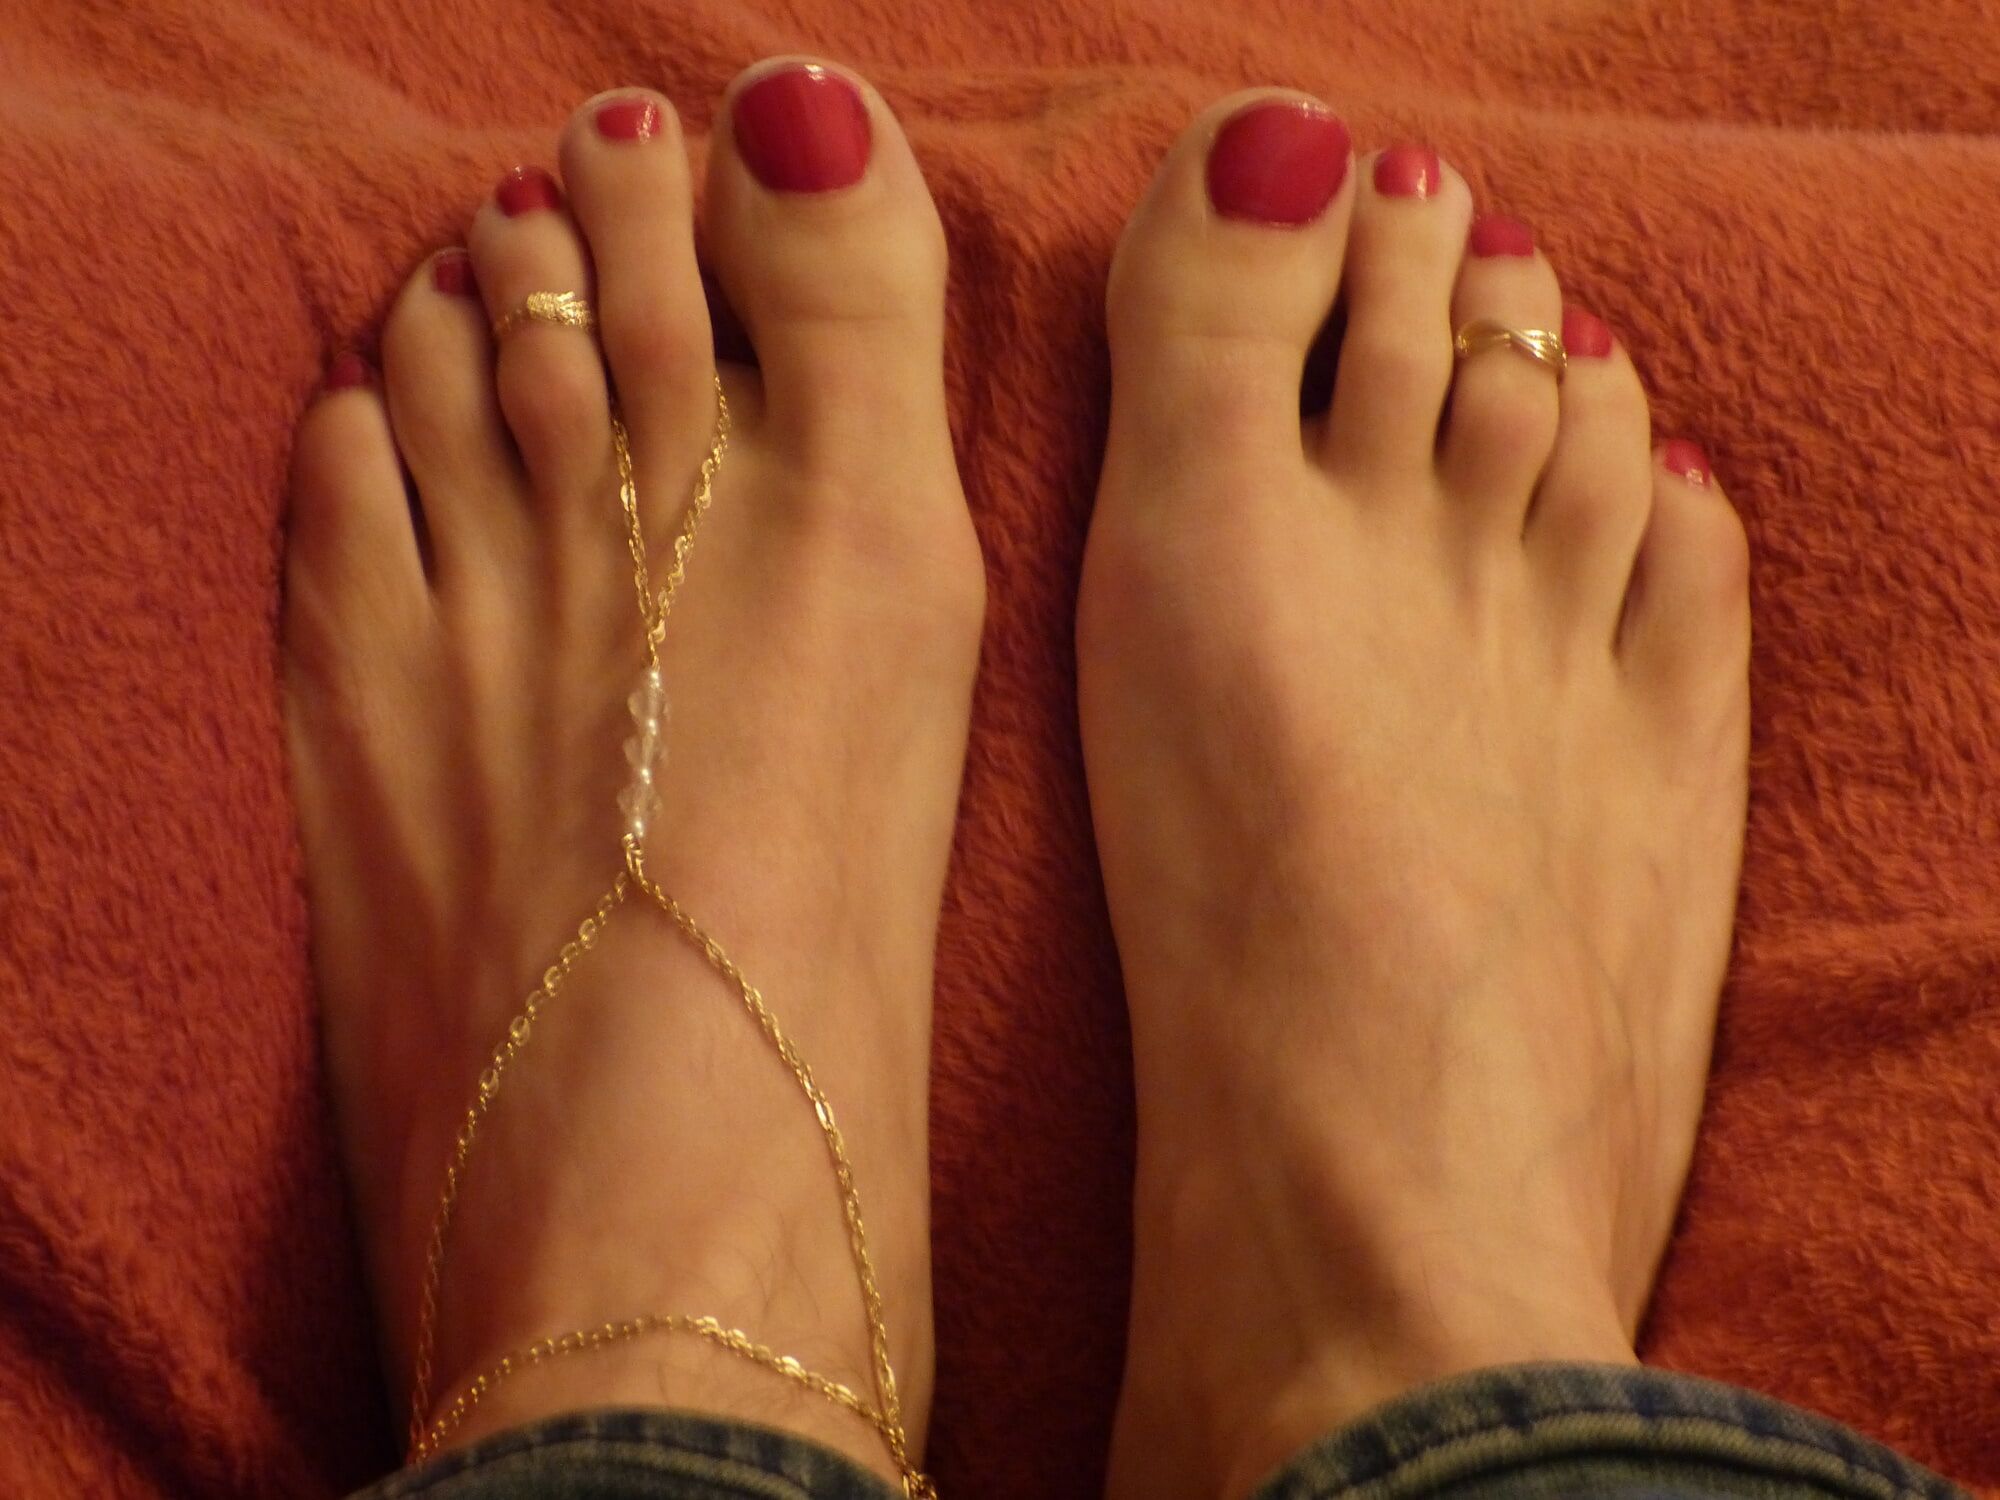 my feet in red polish, jewelry and heels